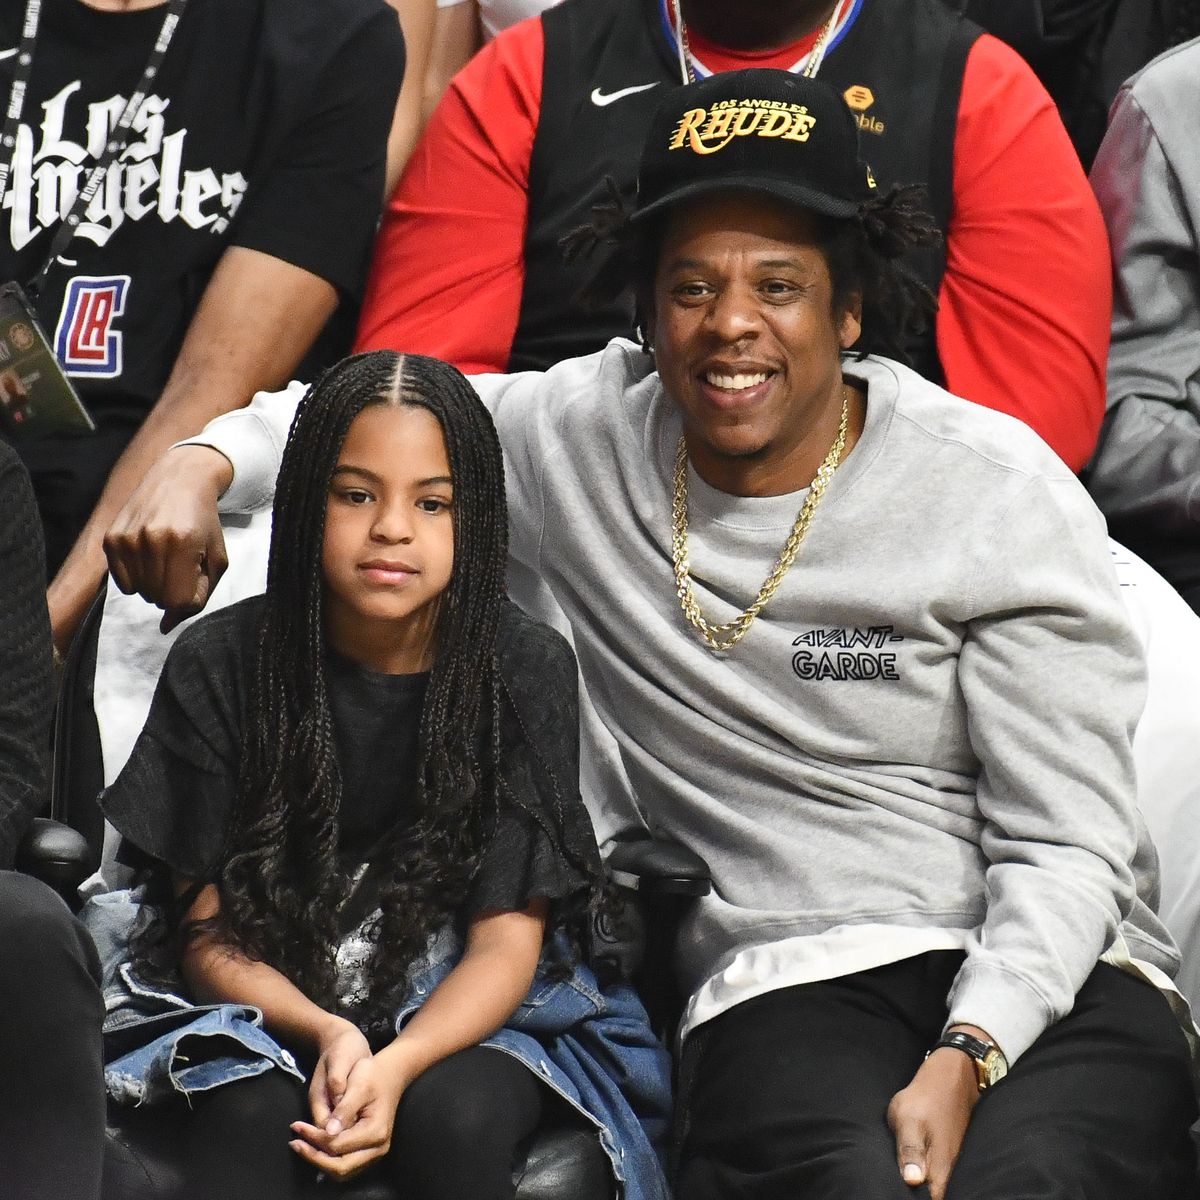 Blue Ivy Carter Helped Into Induct Hall of Jay-Z Her the Fame